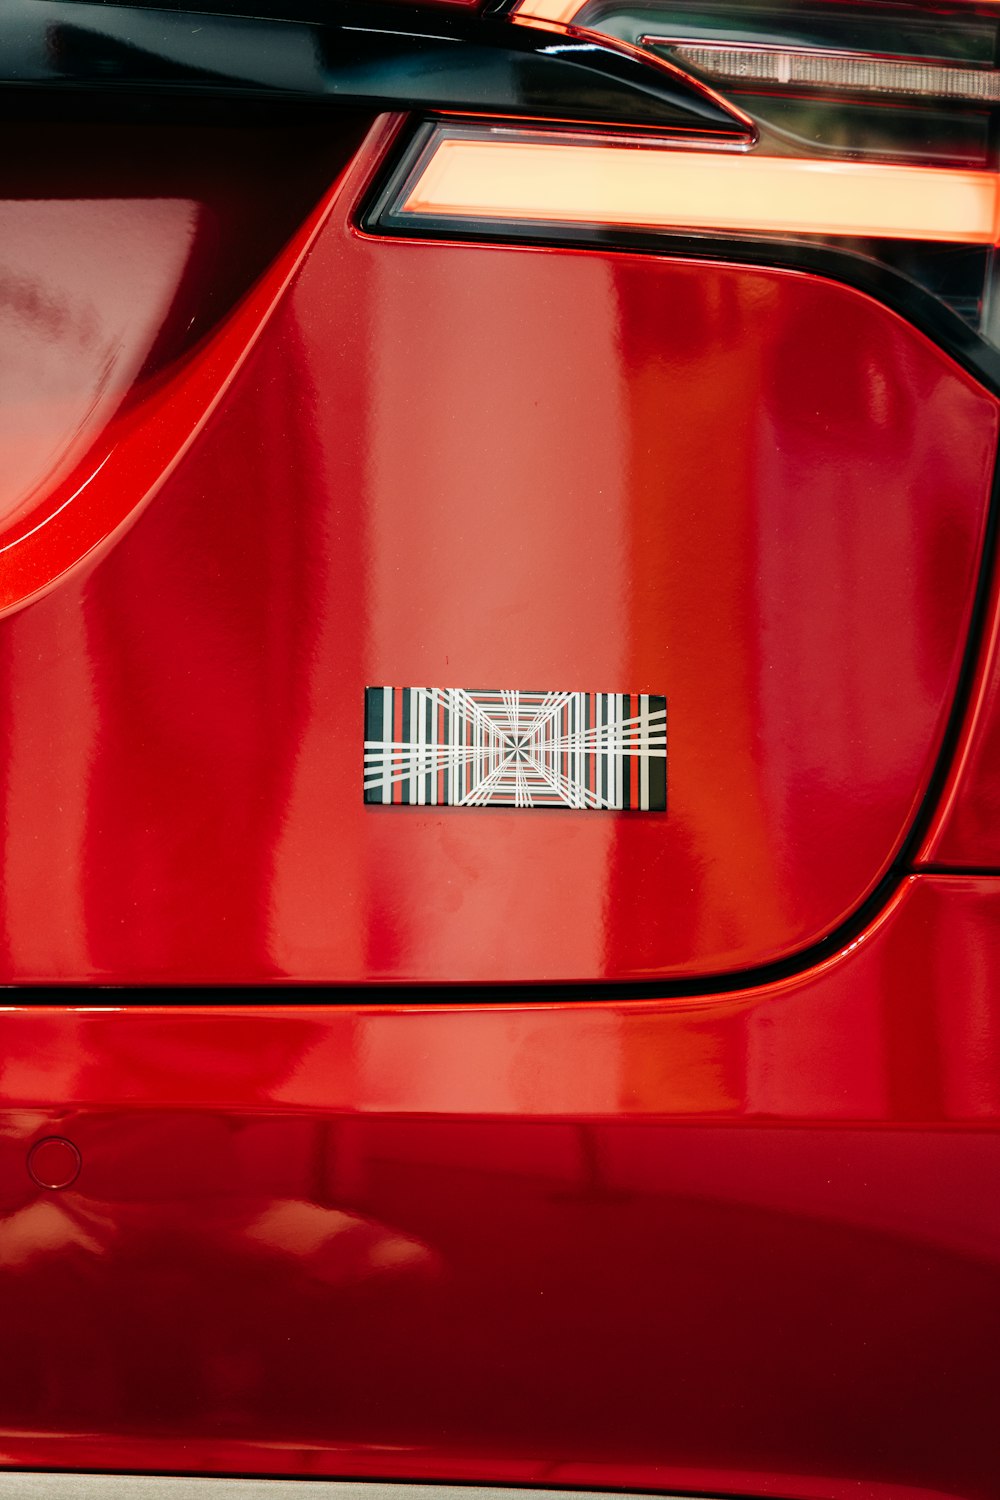 a close up of a red car's tail light